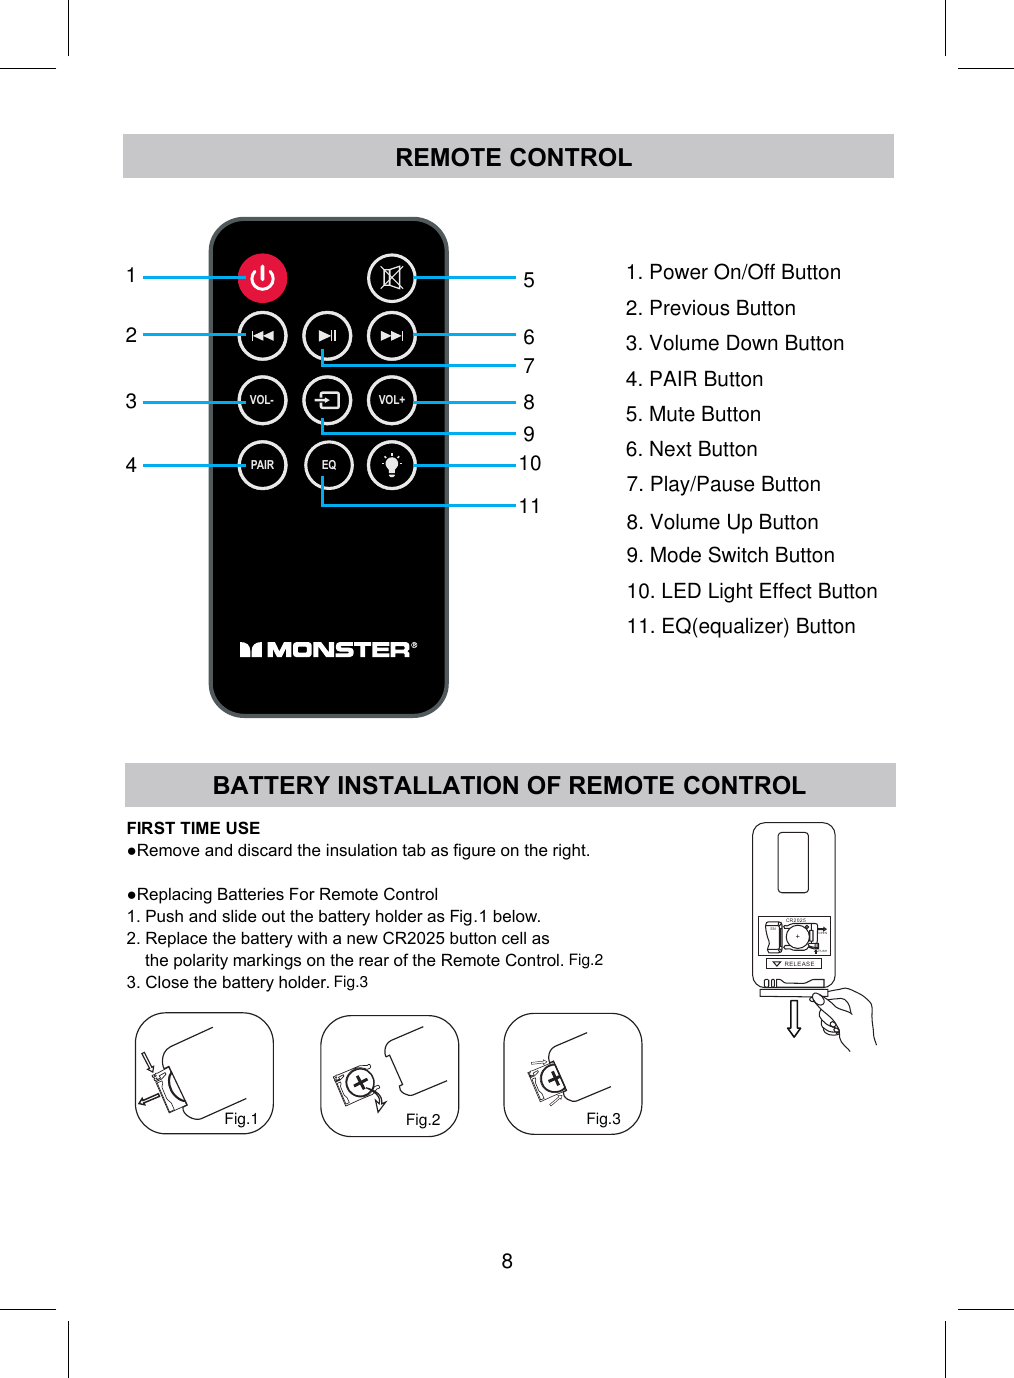 REMOTE CONTROL8VOL- VOL+PAIR EQ12345678910111. Power On/Off Button2. Previous Button3. Volume Down Button4. PAIR Button5. Mute Button6. Next Button7. Play/Pause Button8. Volume Up Button9. Mode Switch Button10. LED Light Effect Button11. EQ(equalizer) Button BATTERY INSTALLATION OF REMOTE CONTROLFIRST TIME USE●Remove and discard the insulation tab as figure on the right.●Replacing Batteries For Remote Control1. Push and slide out the battery holder as Fig 1 below.2. Replace the battery with a new CR2025 button cell asthe polarity markings on the rear of the Remote Control.3. Close the battery holder.RE LE A SEPUSHOPENR2 02 5C+SNFig.1 Fig.2 Fig.3.Fig.2Fig.3